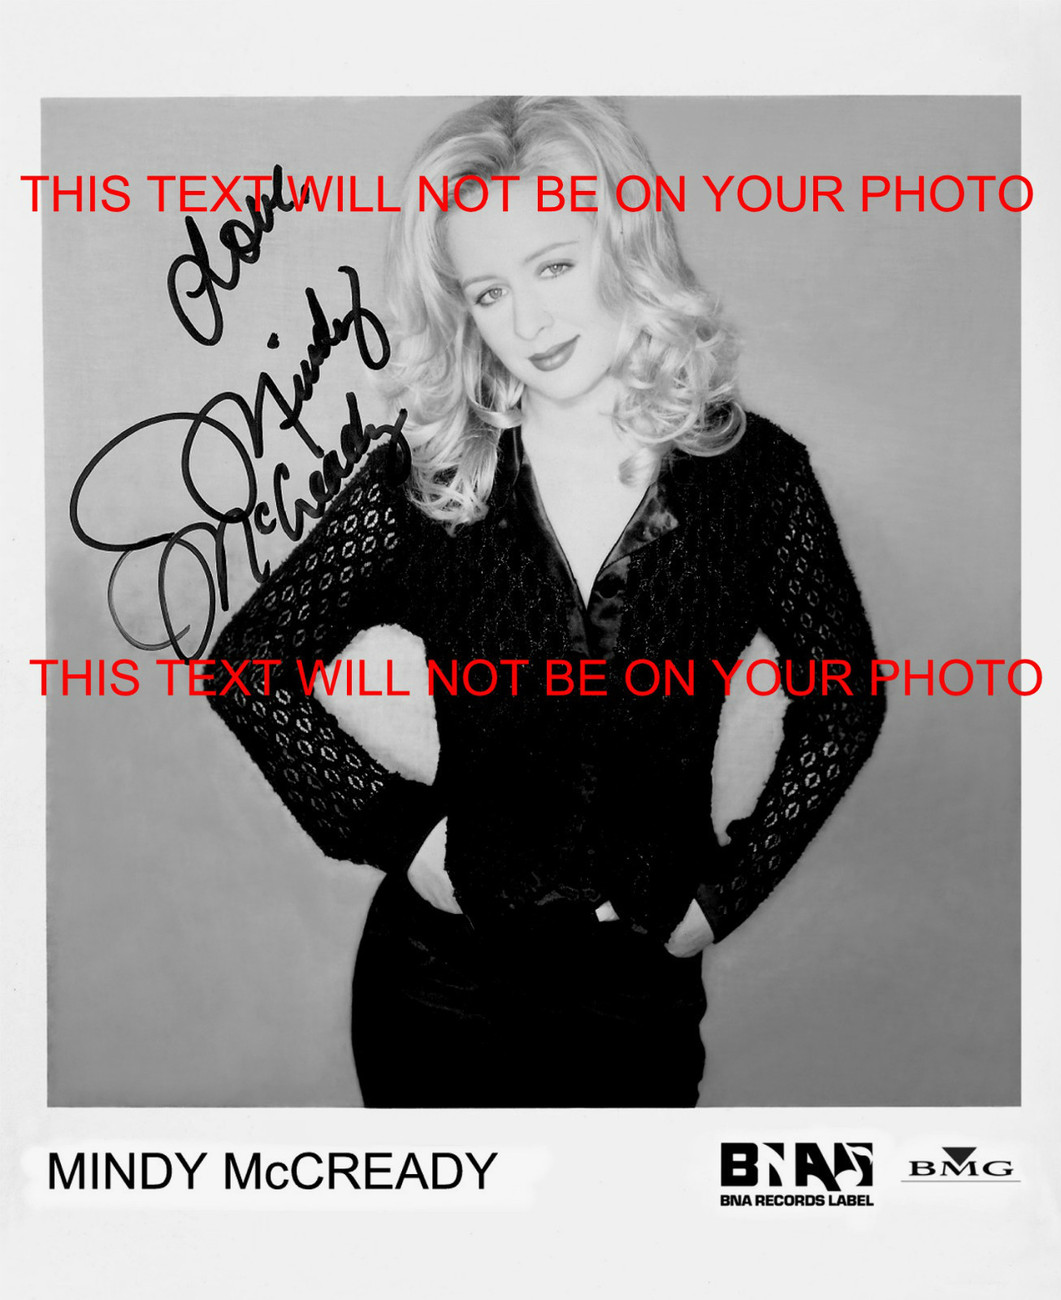 MINDY MCCREADY AUTOGRAPHED SIGNED 8x10 RP MEDIA PUBLICITY PHOTO COUNTRY MUSIC